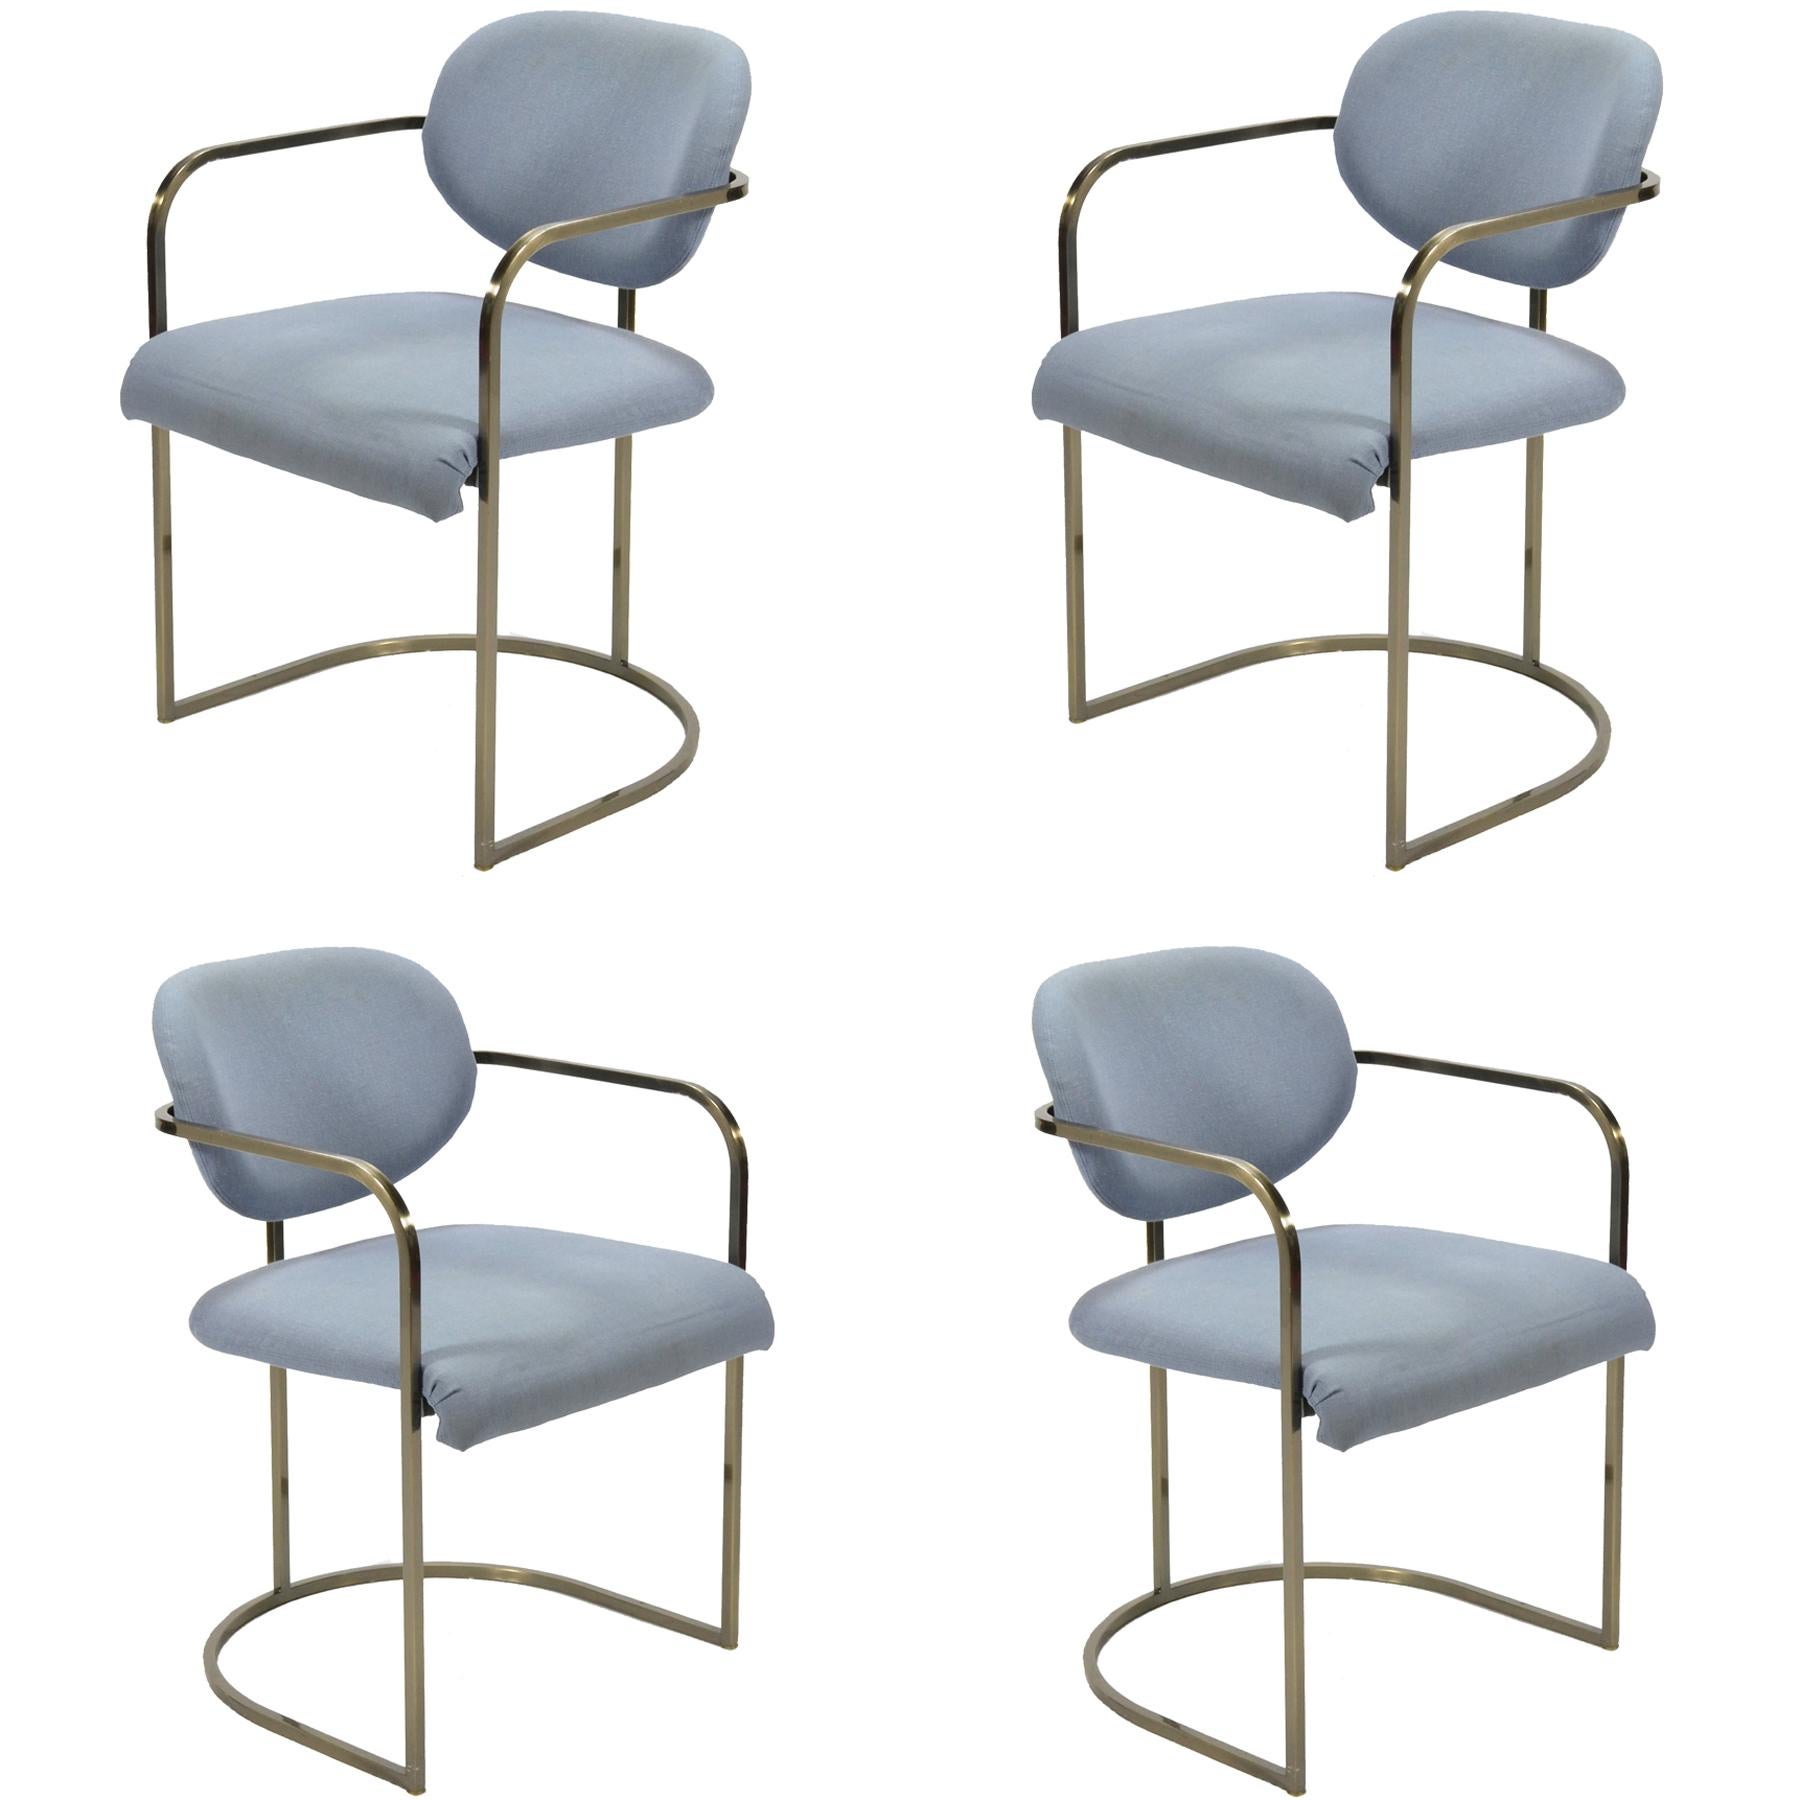 This set of armchairs by D.I.A. have frames of steel with an antiqued brass finish which support seats and backs and give them a floating appearance. They share a similar design vocabulary with the work of Milo Baughman.

We have the four shown, as